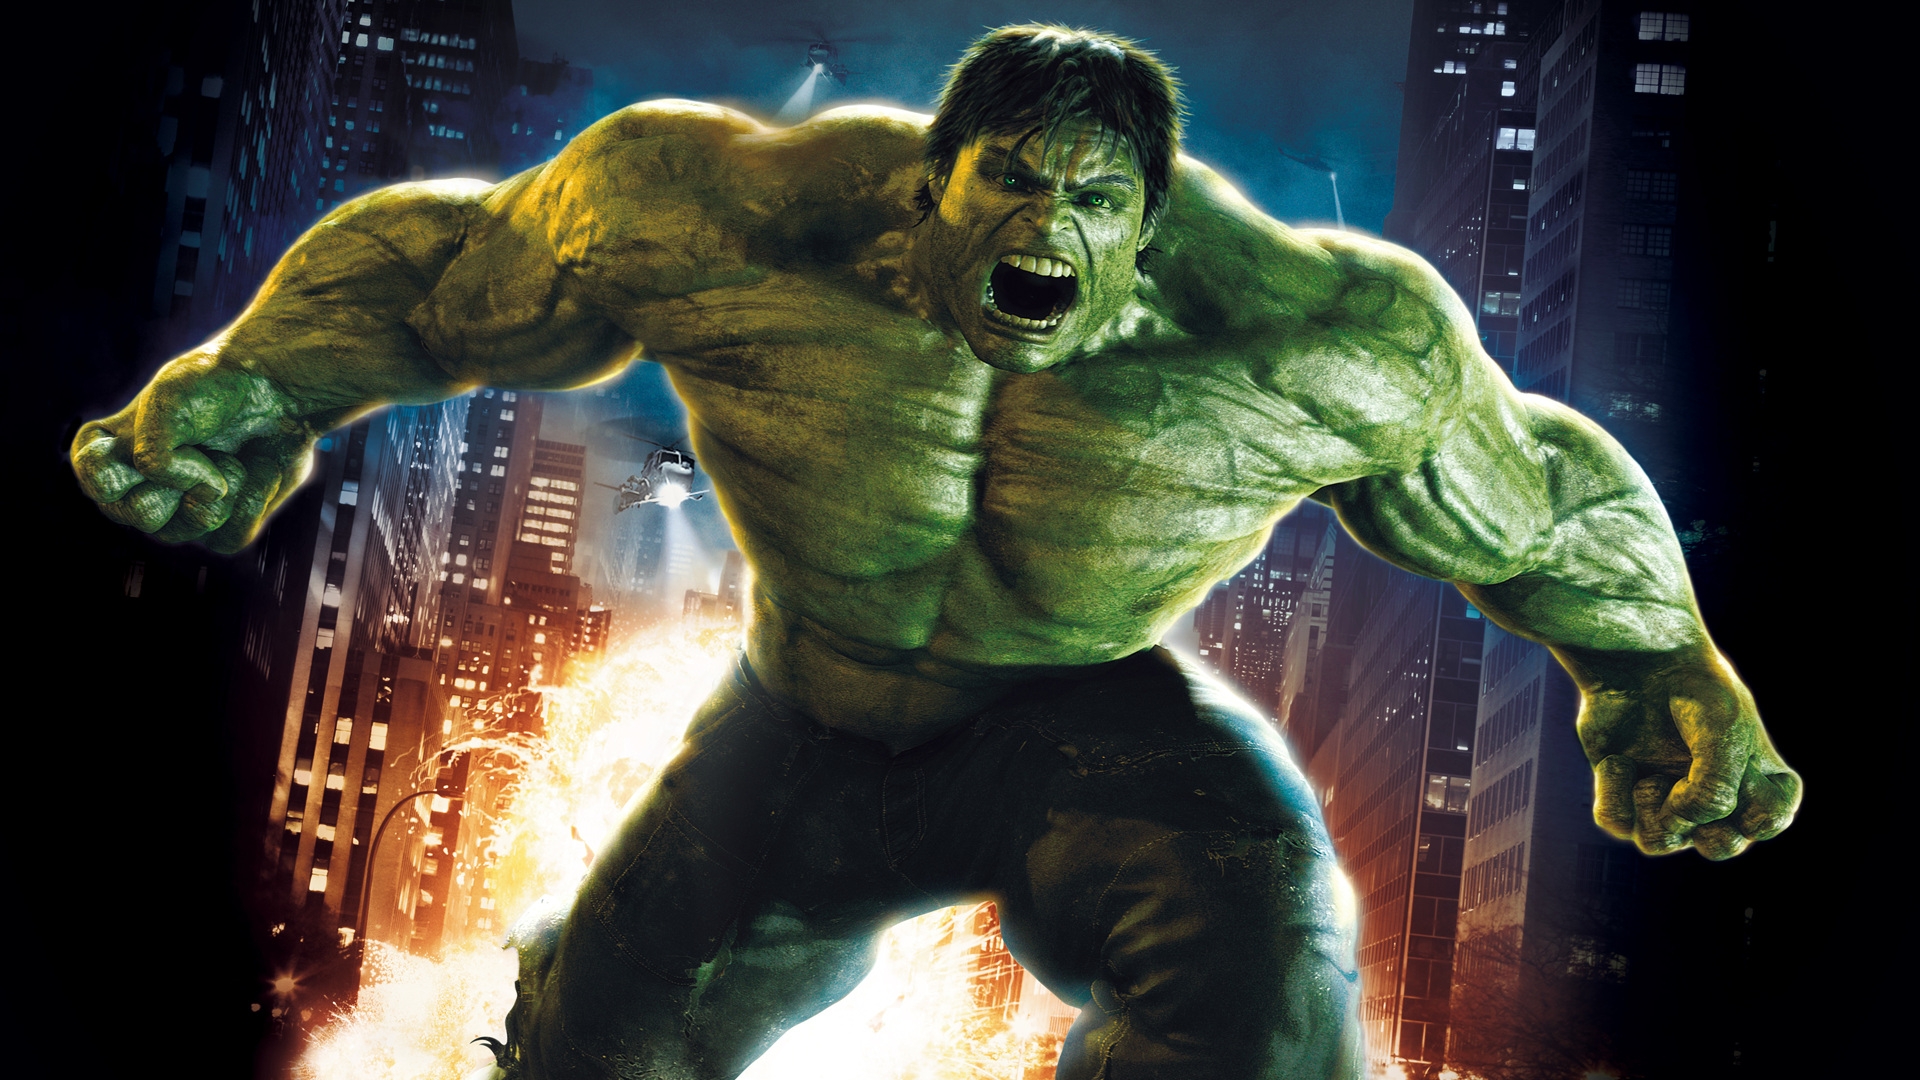 Download The Incredible Hulk wallpaper for mobile phone, free The Incredible Hulk HD picture